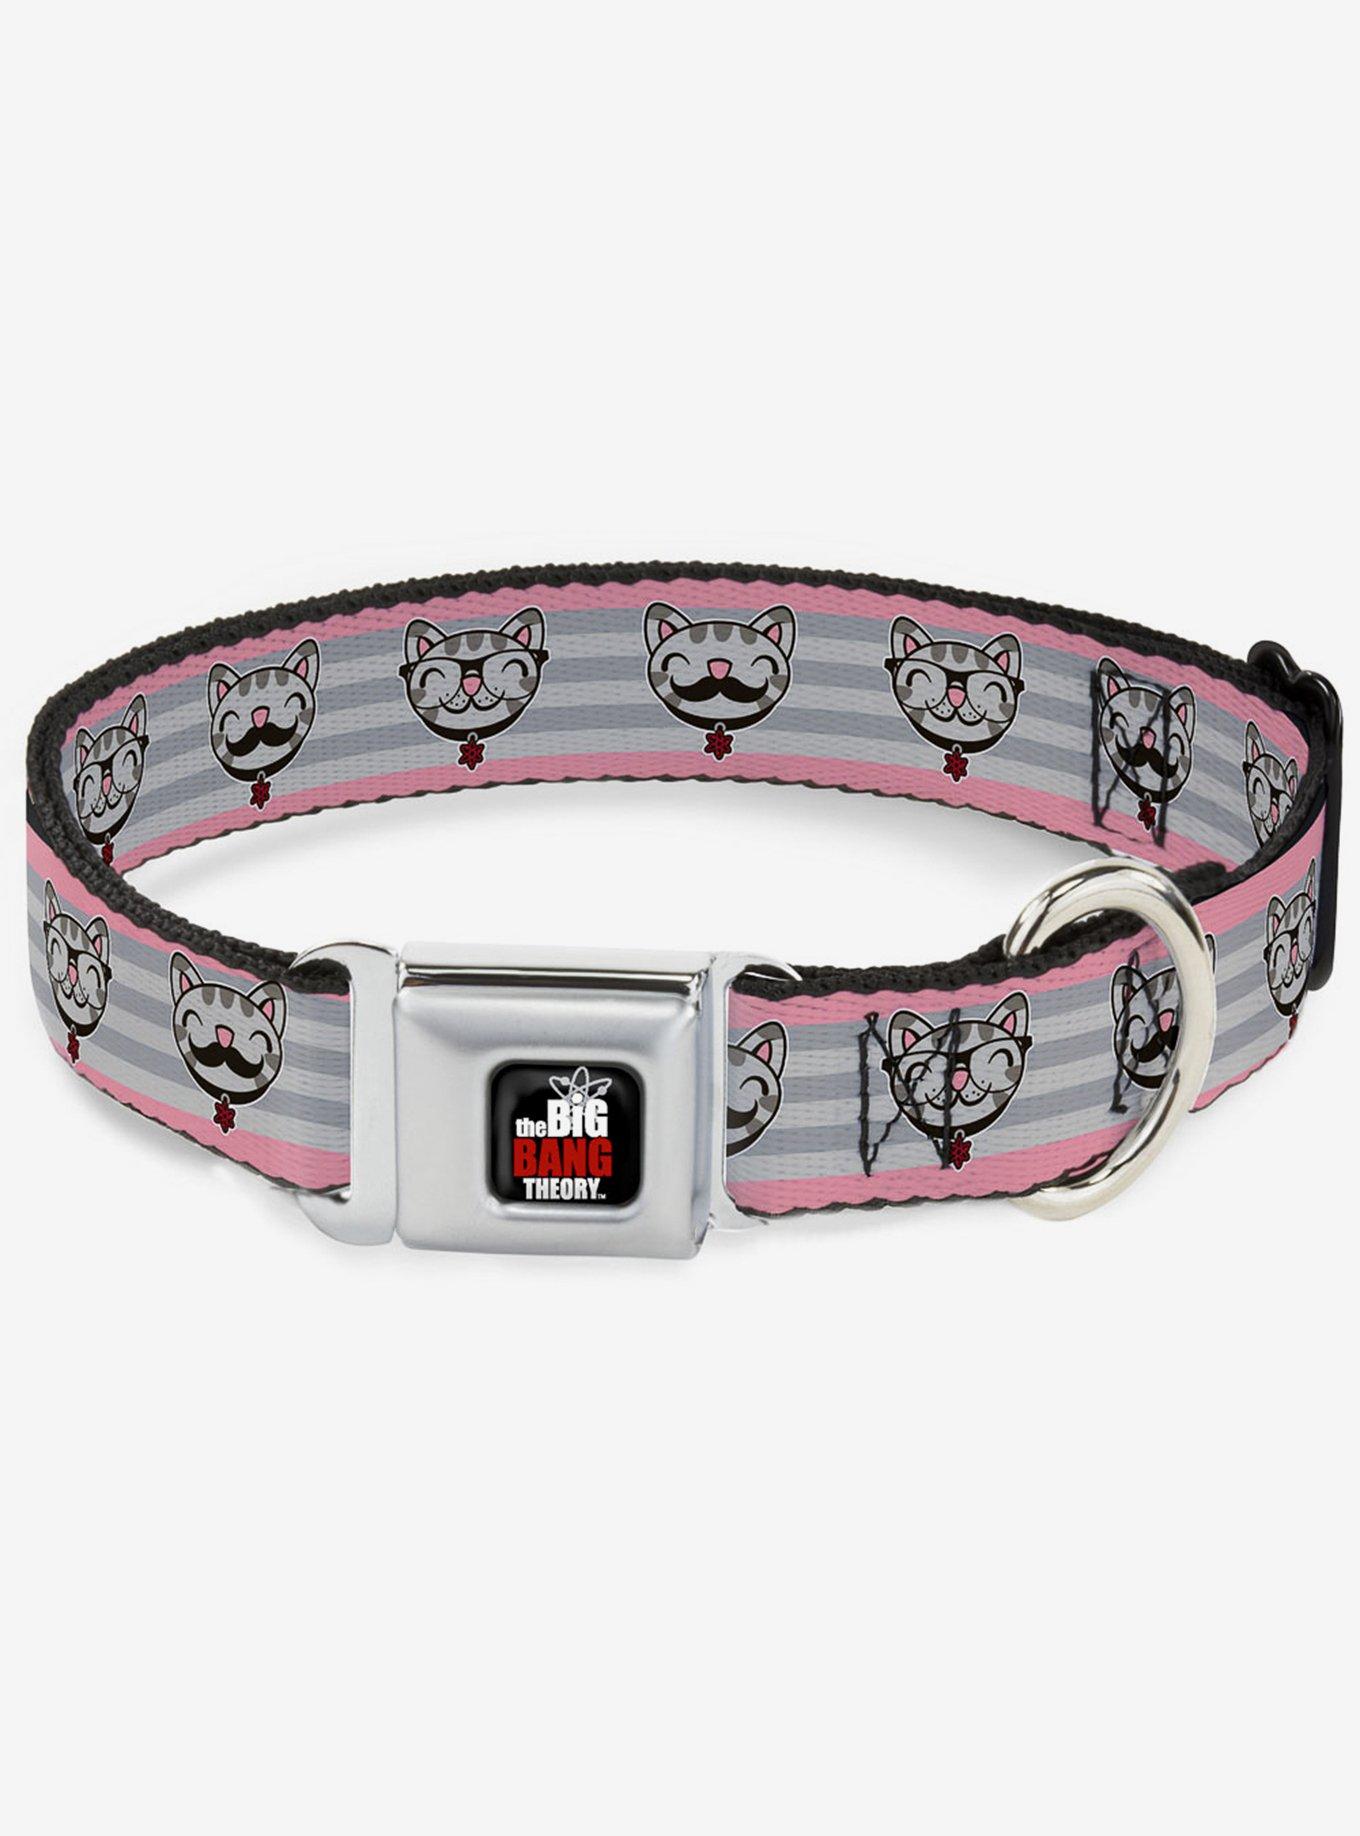 The Big Bang Theory Soft Kitty Nerd Mustacho Expressions Seatbelt Buckle Dog Collar, GREY, hi-res